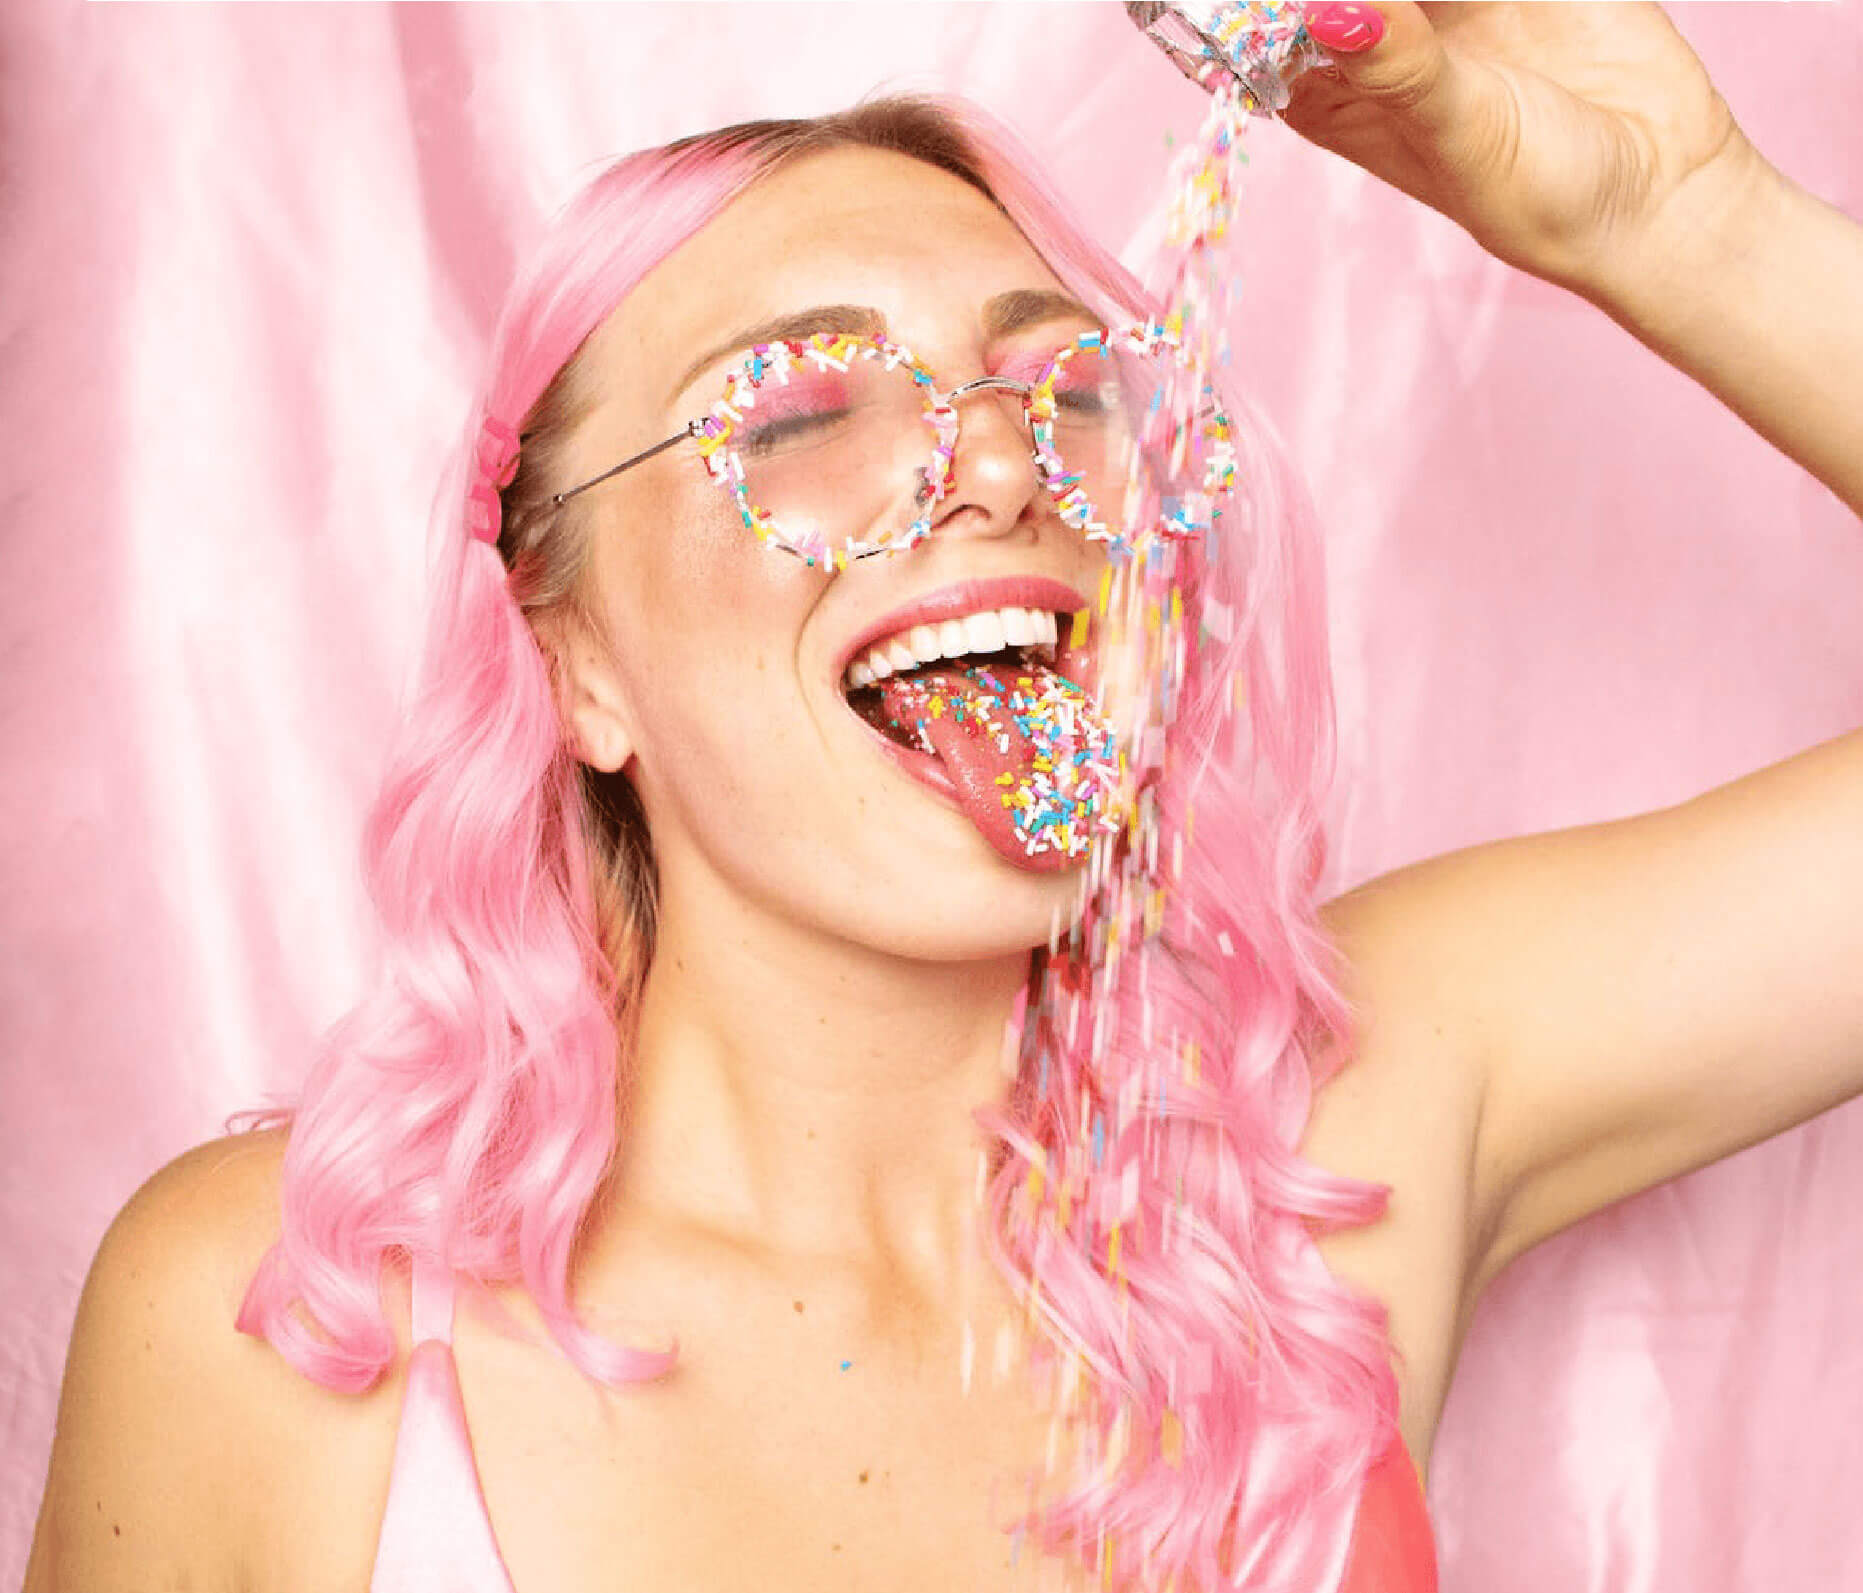 Young woman with pastel pink hair and glasses wearing rainbow sprinkles, embodying the playful spirit of BlissVixen's premium toys and unforgettable parties